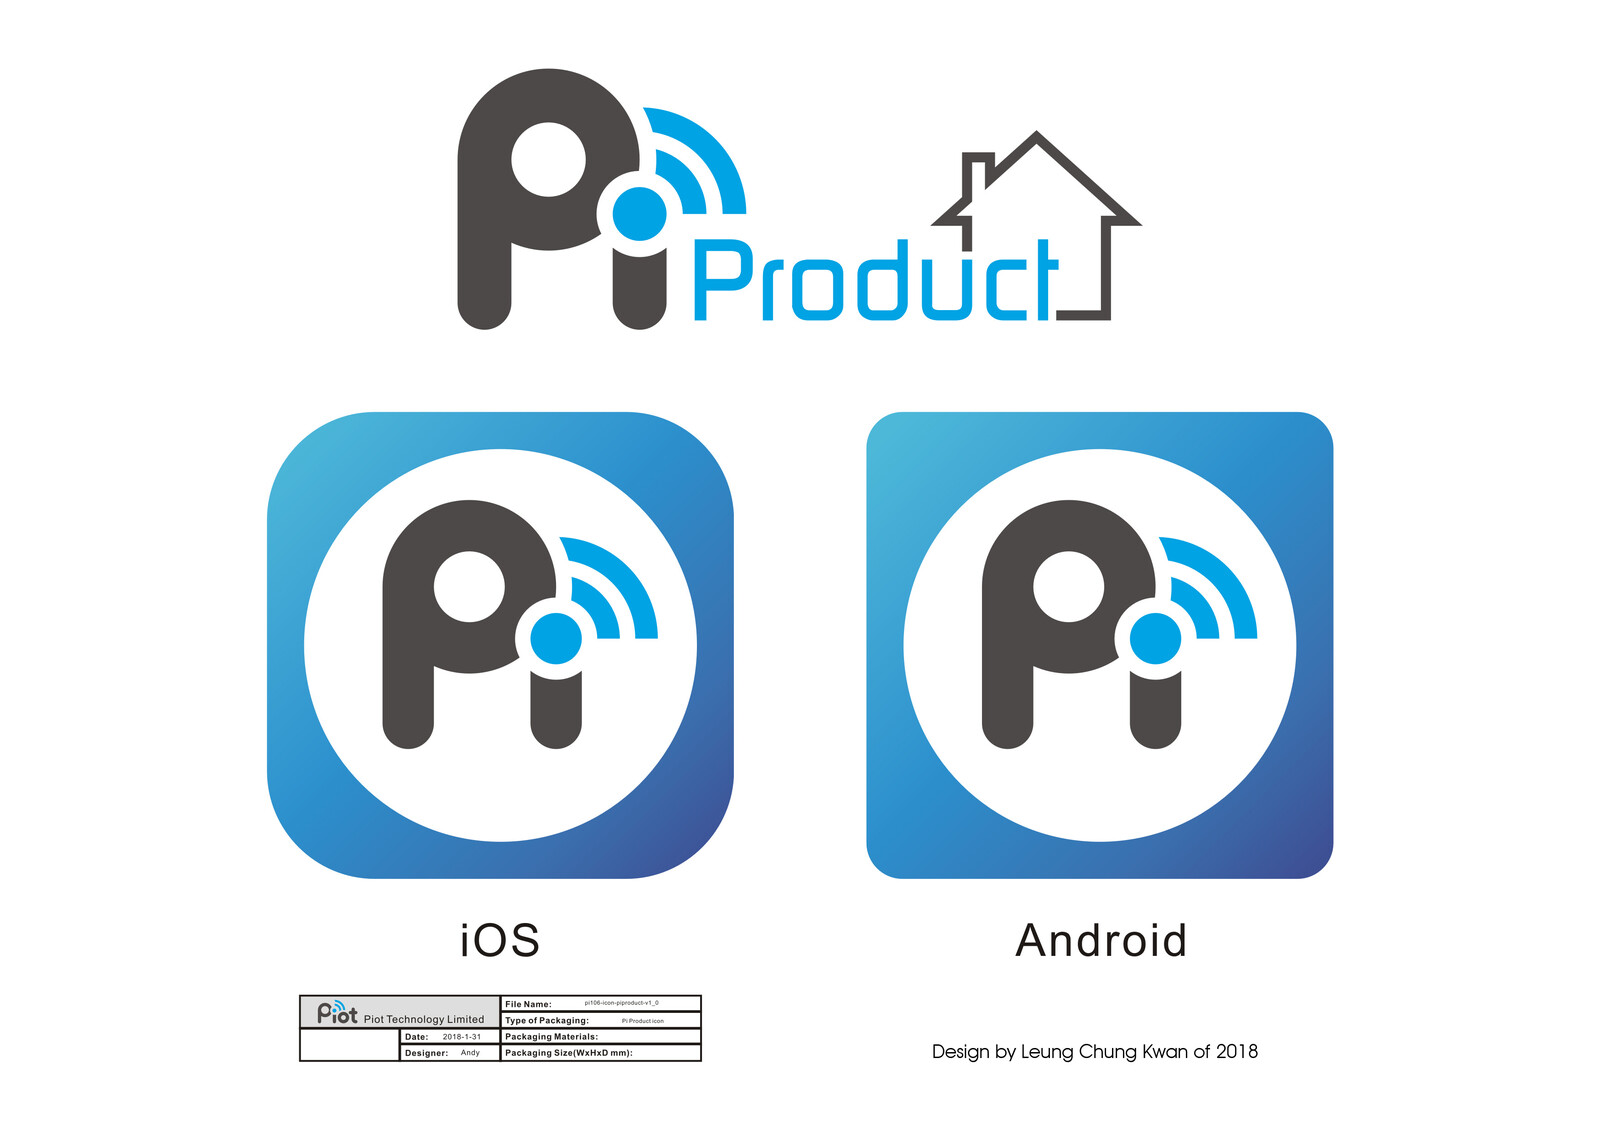 💎 App Icon | Design by Leung Chung Kwan on 2018 💎
App Name︰Piproduct | Client︰Piot Technology Limited